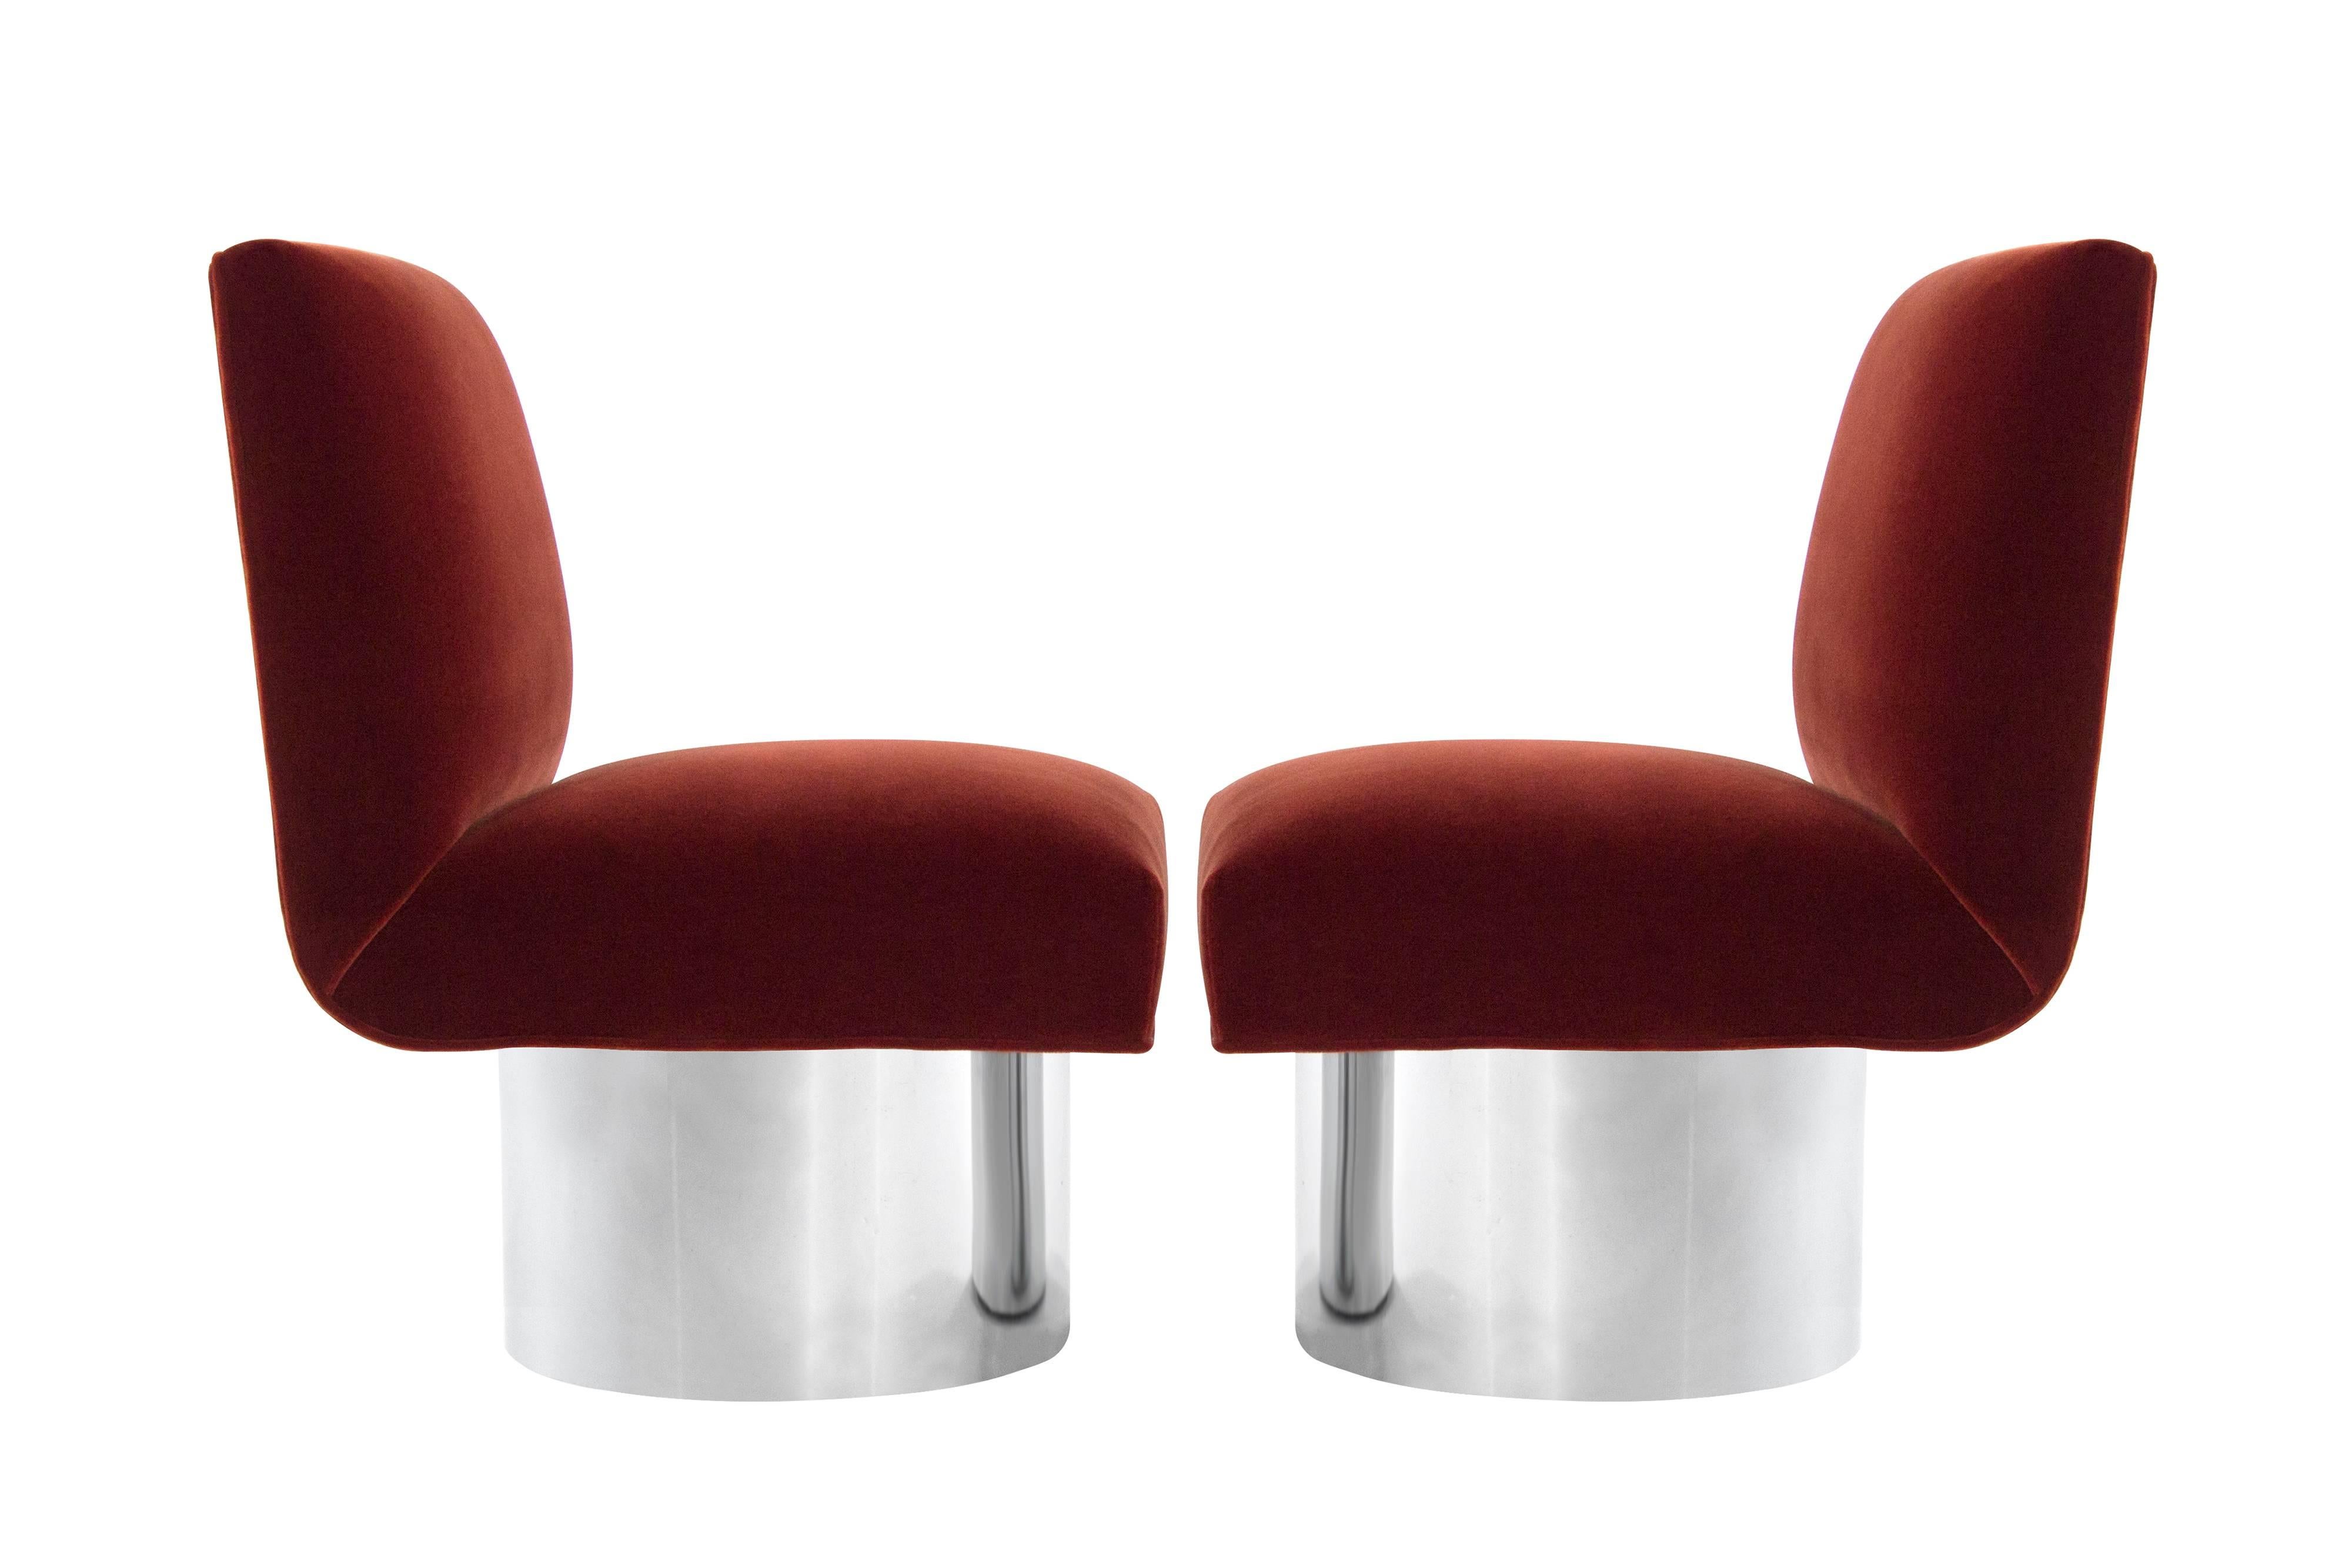 Set of Milo Baughman for Thayer Coggin chairs with return-swivel system on tall drum nickel bases, circa 1960s.

Newly upholstered in rust red mohair.